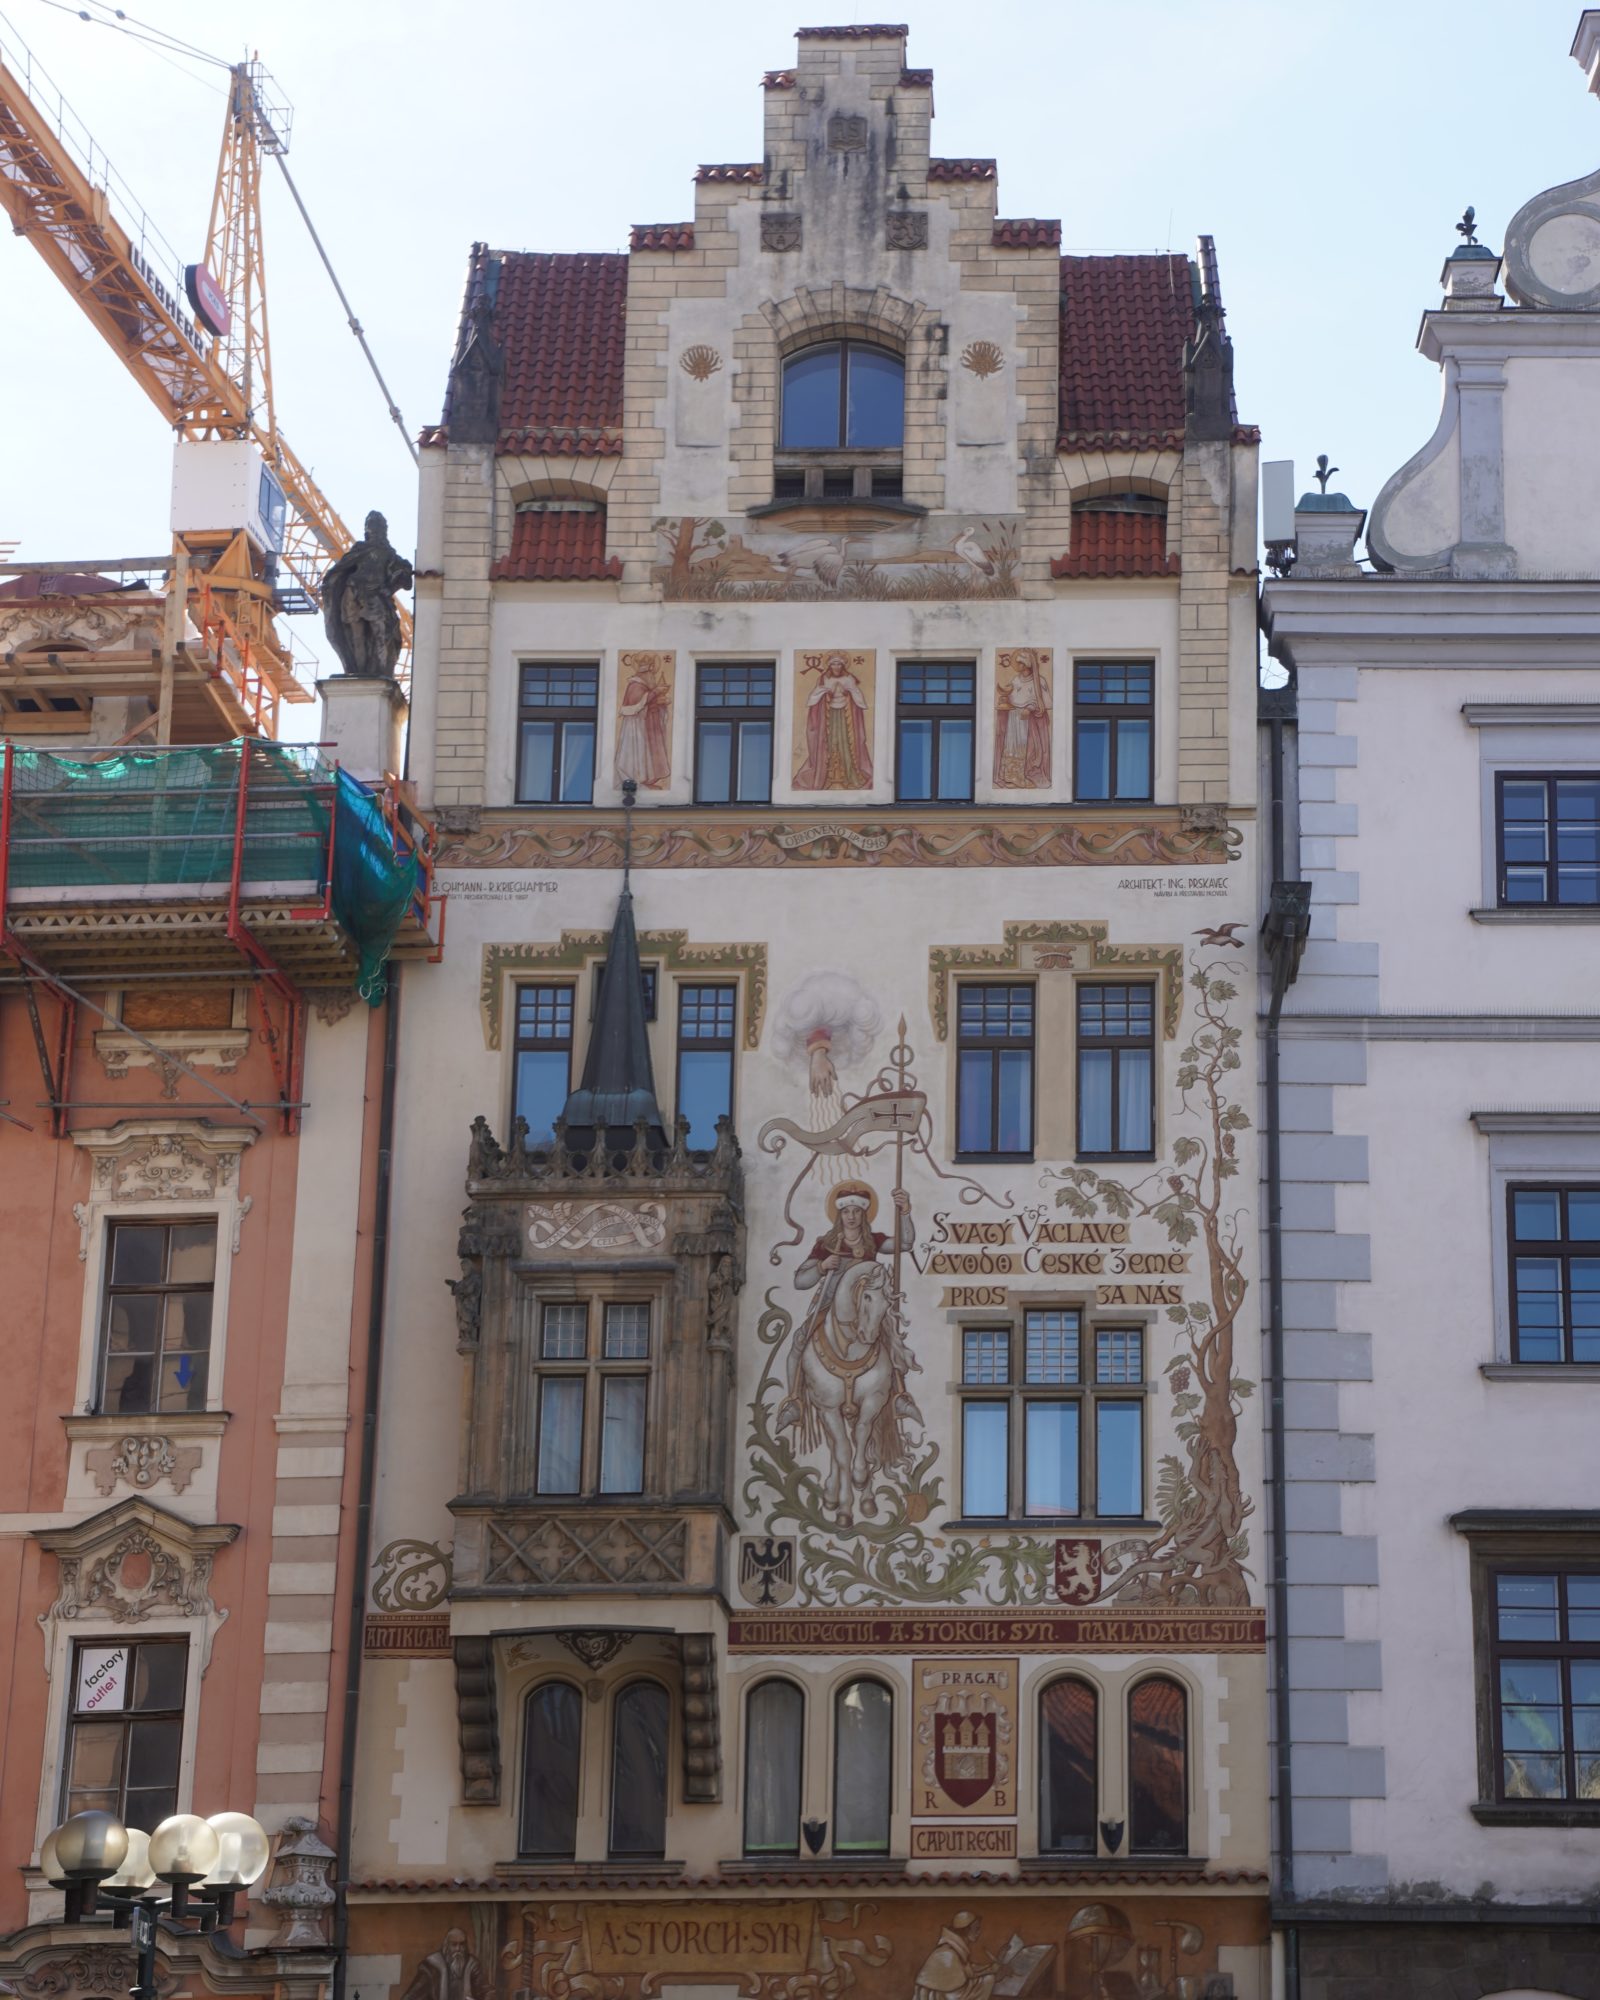 A house with a Gothic balcony and elaborately painted façade